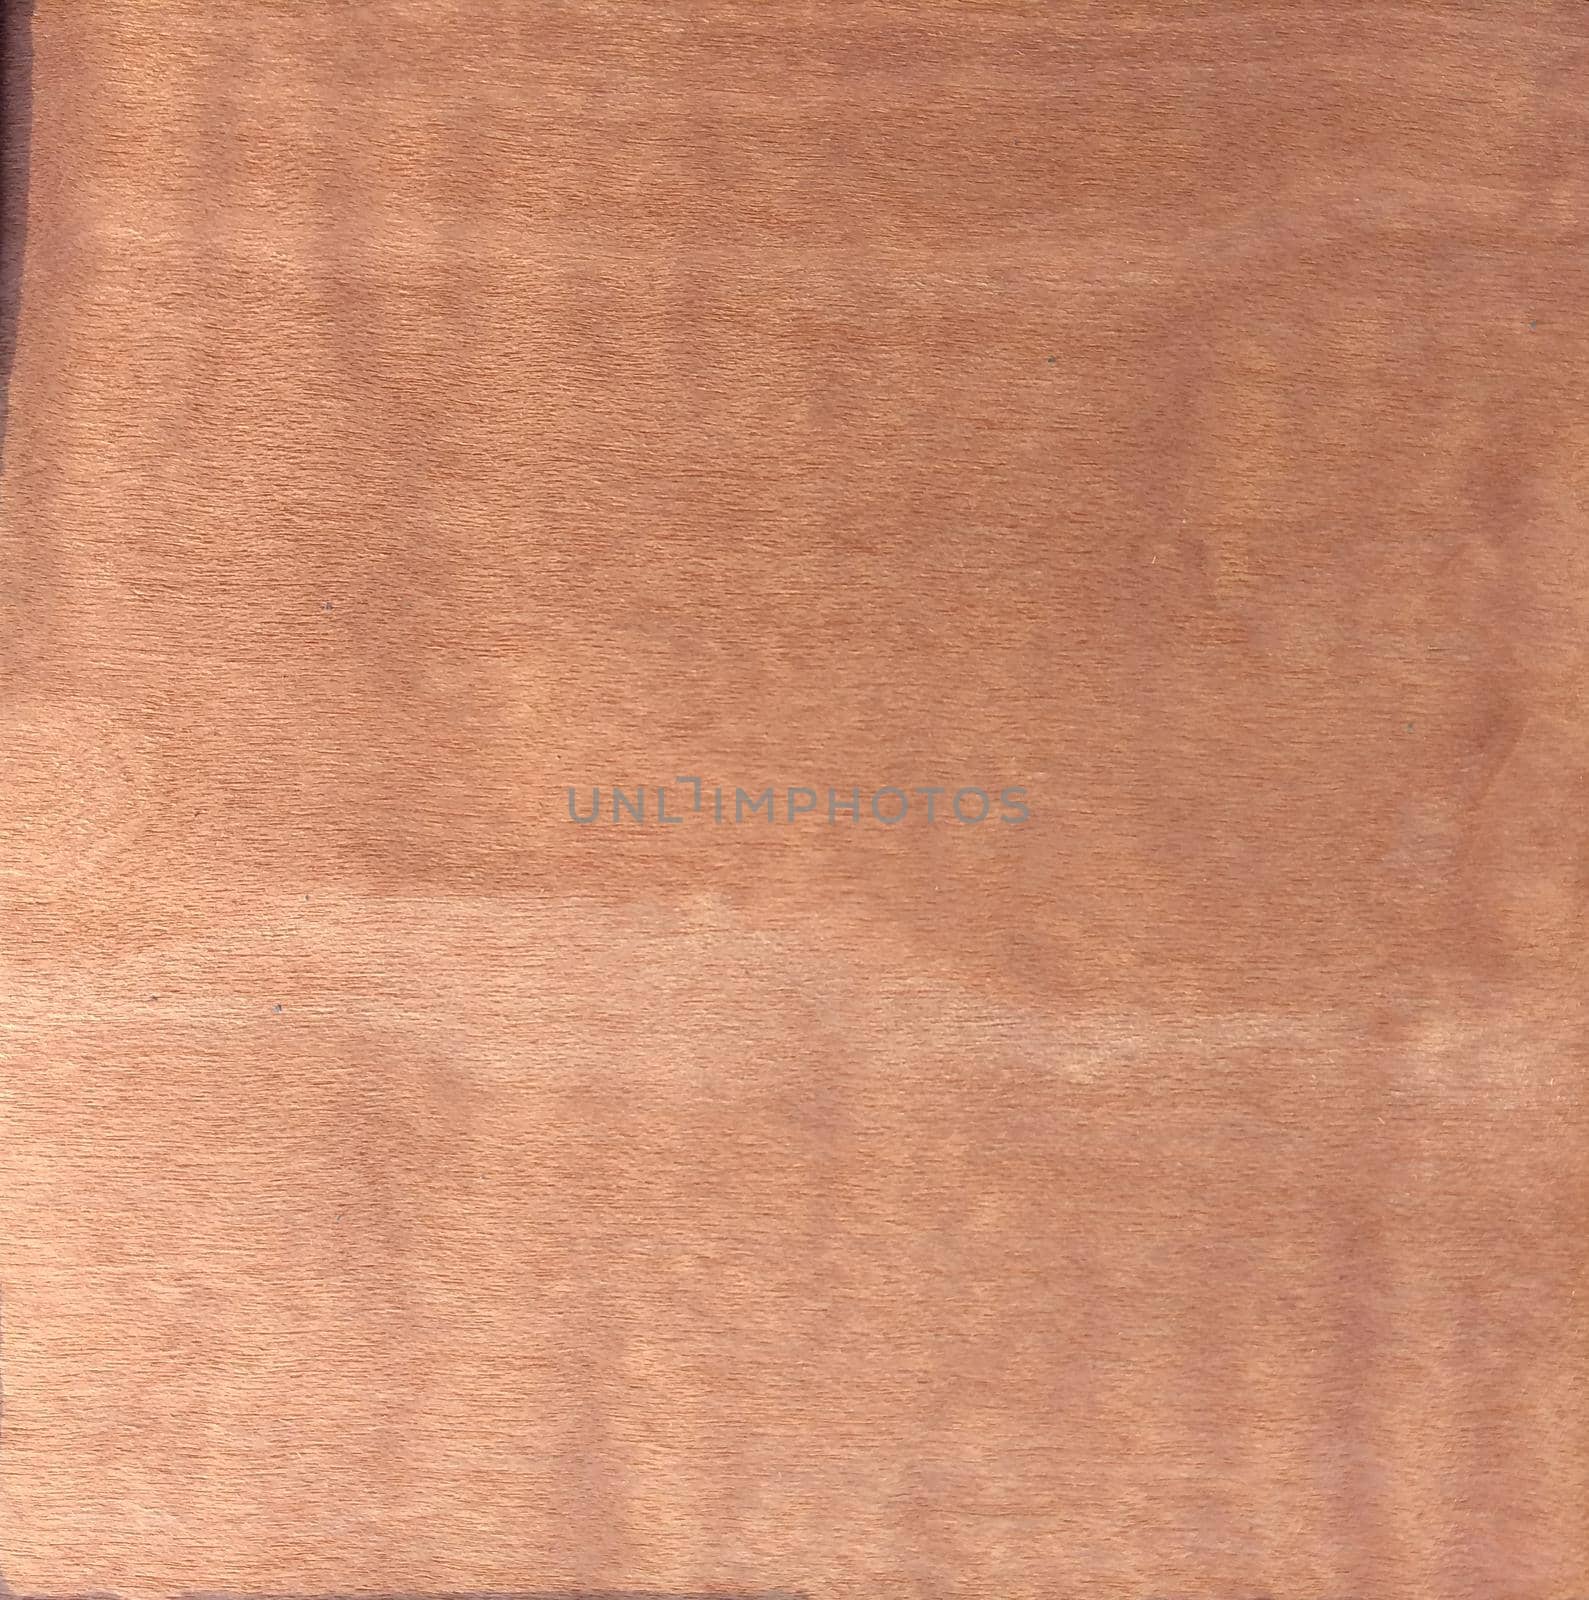 Natural Dyed sycamore burgundy wood texture background. Dyed sycamore burgundy veneer surface for interior and exterior manufacturers use.